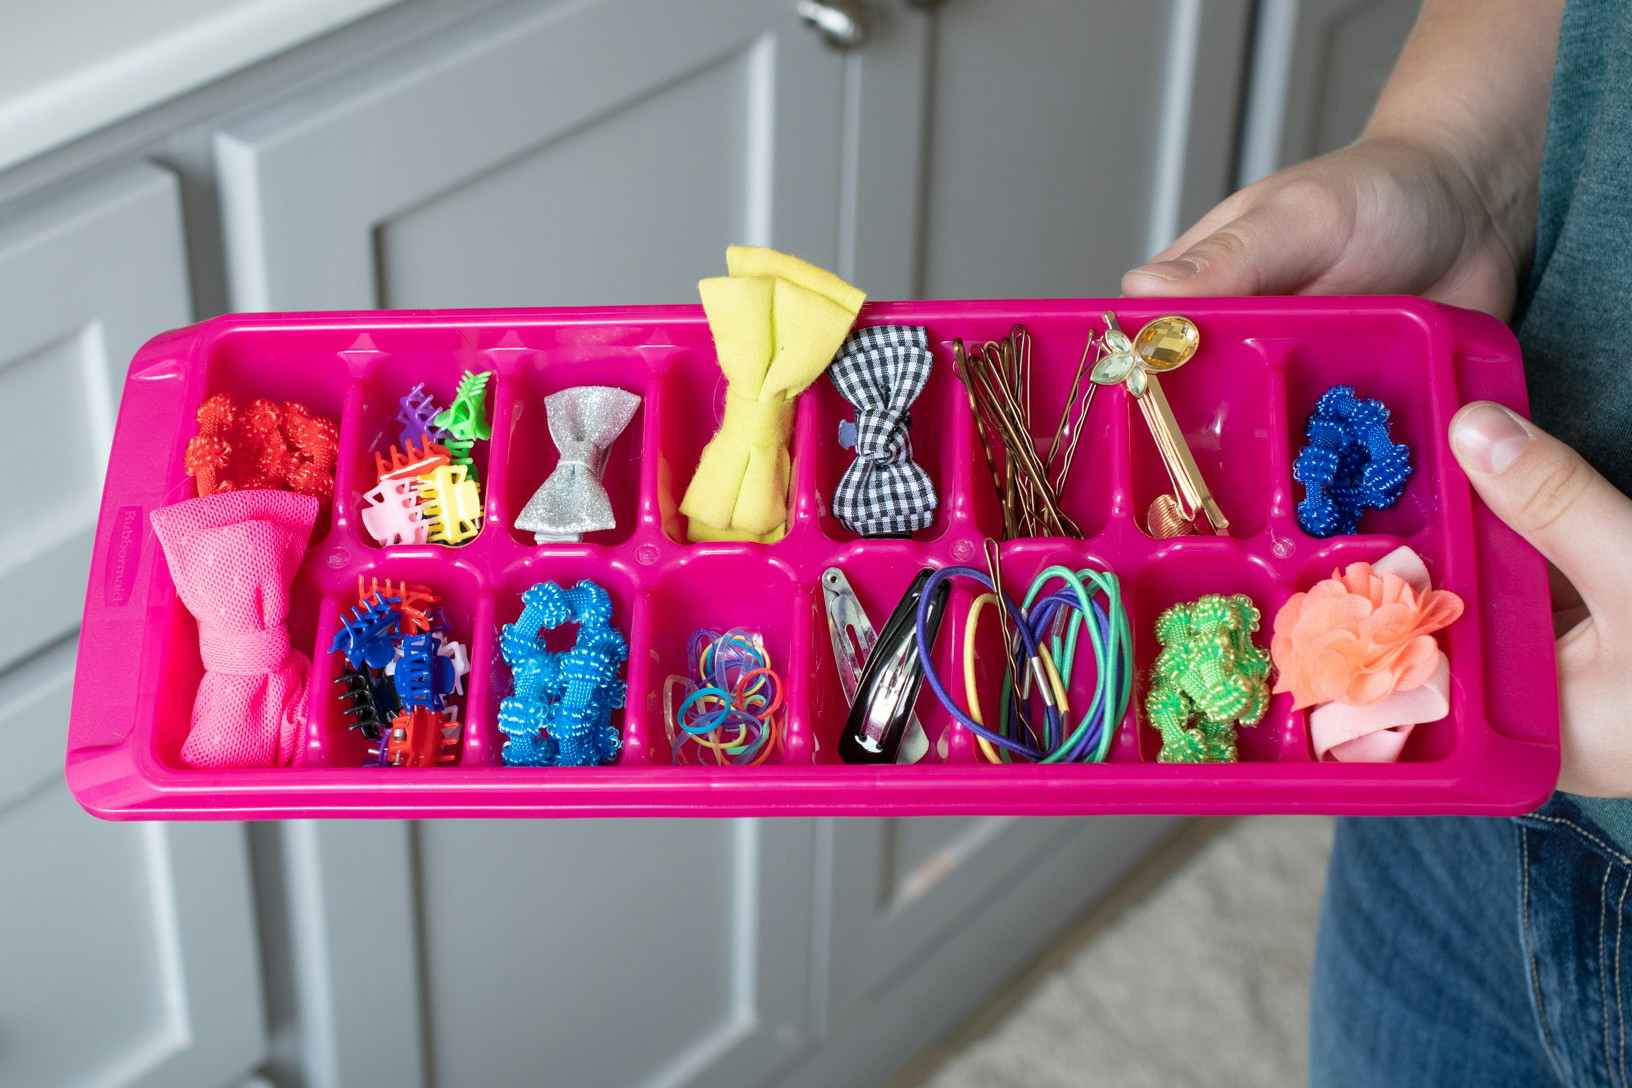 A woman holding an ice cube tray filled with colorful hair accessories.